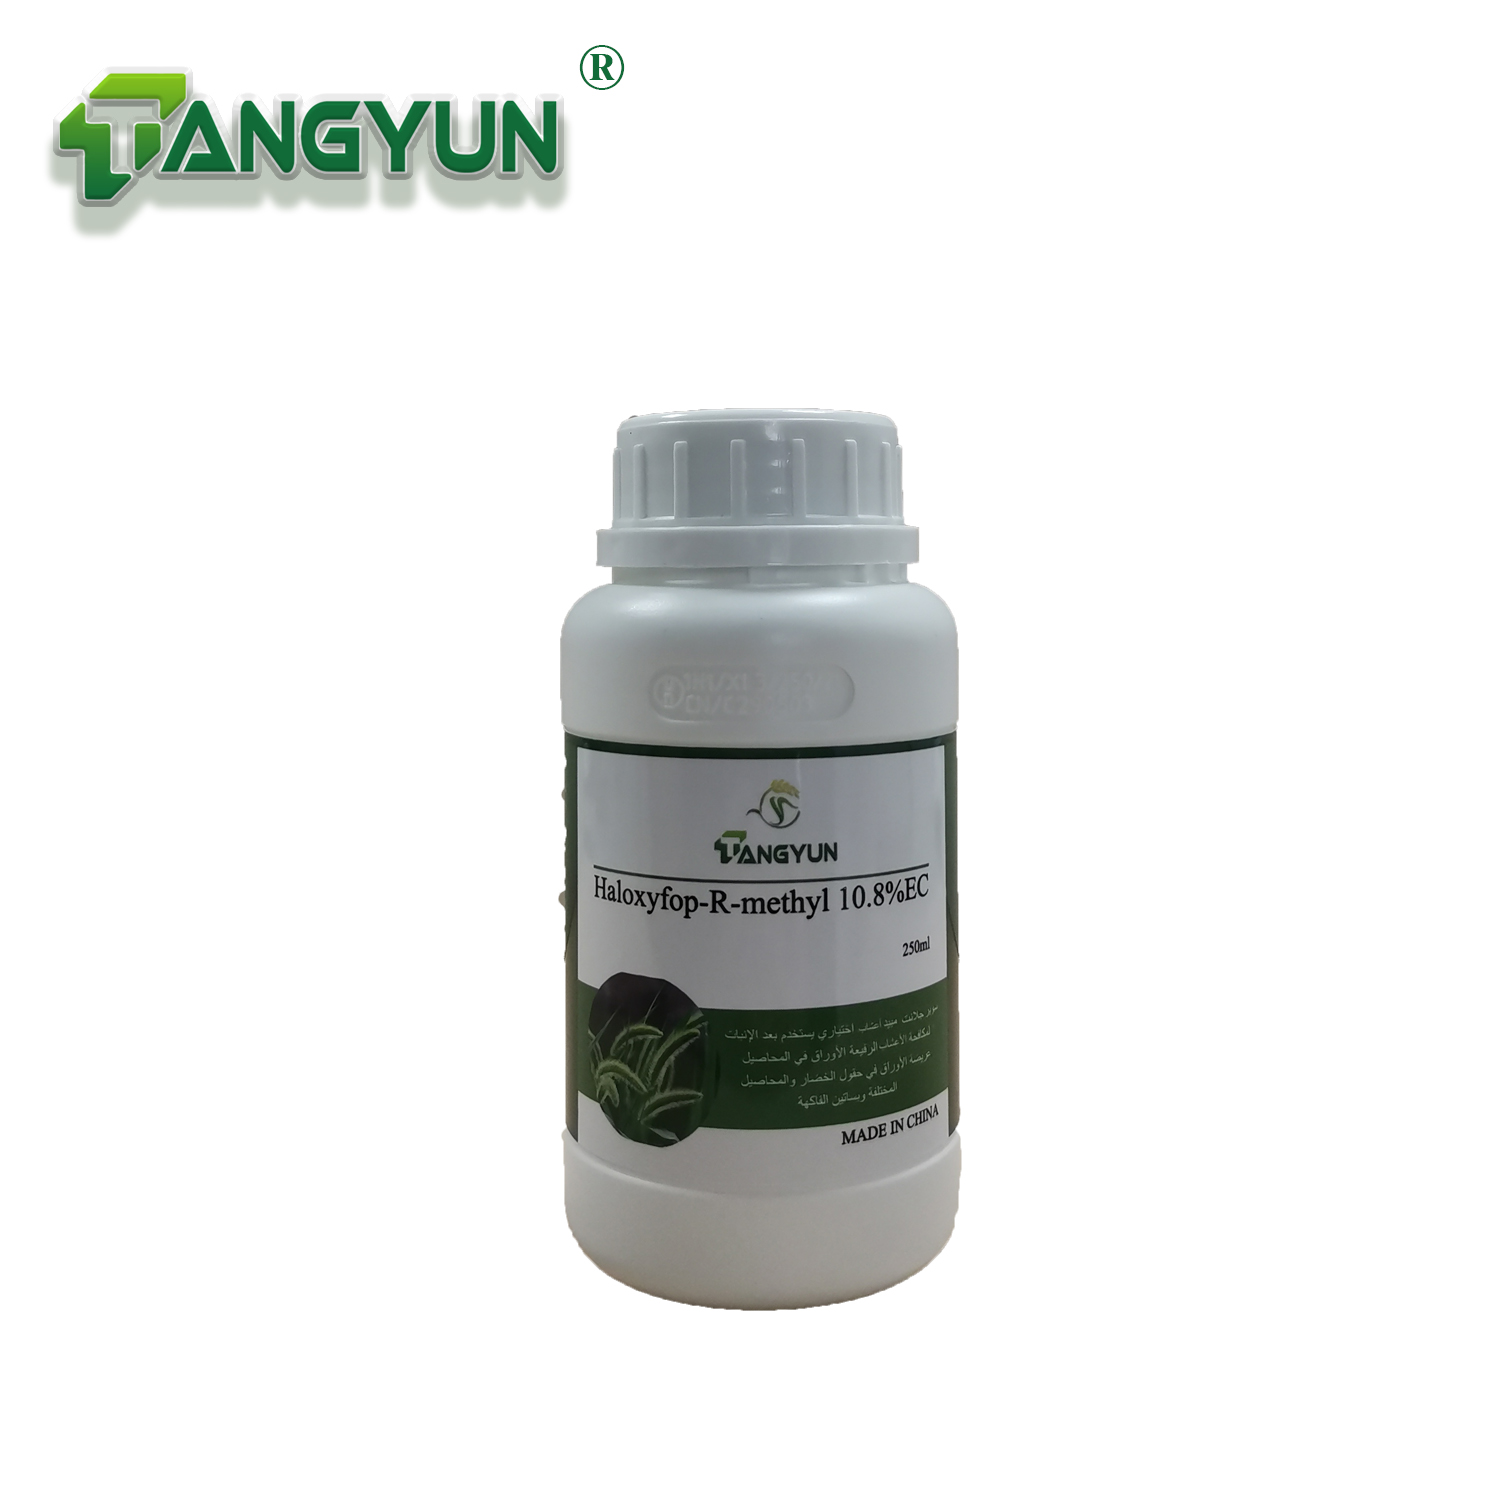 Top quality Herbicide Haloxyfop-r-methyl 108g/LEC with factory price